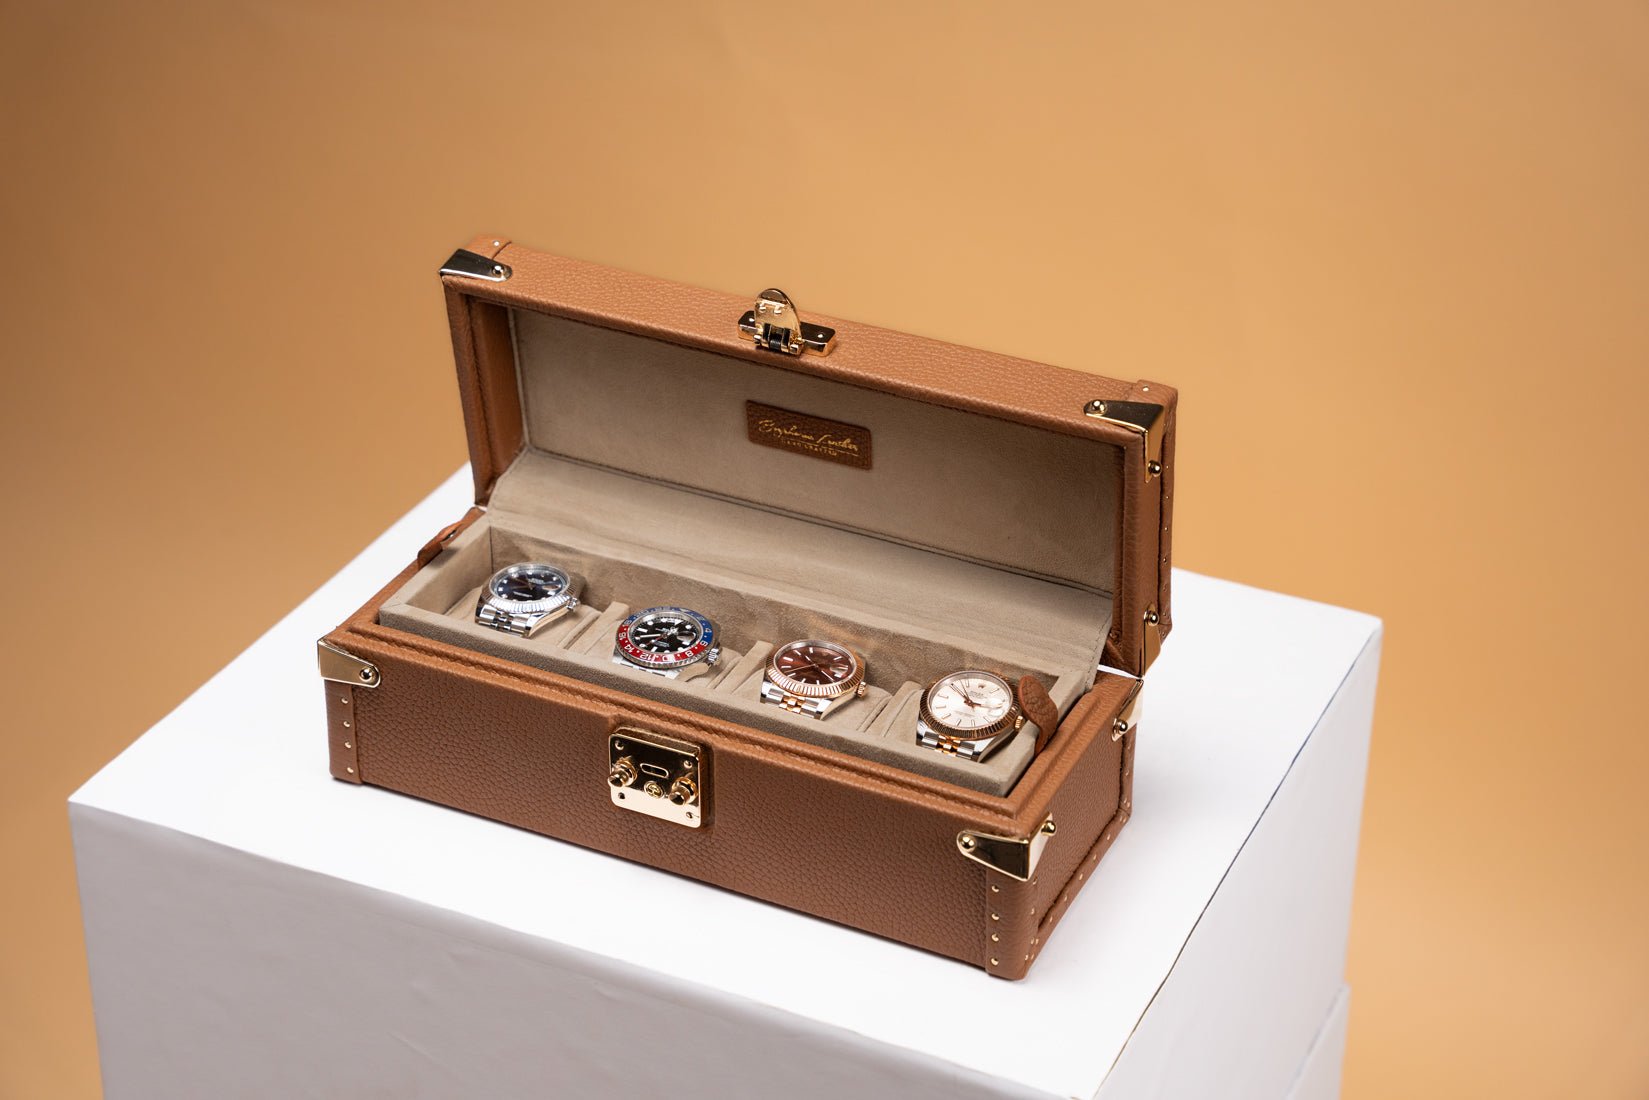 Bosphorus LeatherPetra Watch Case - Togo Camel For 4 Watches